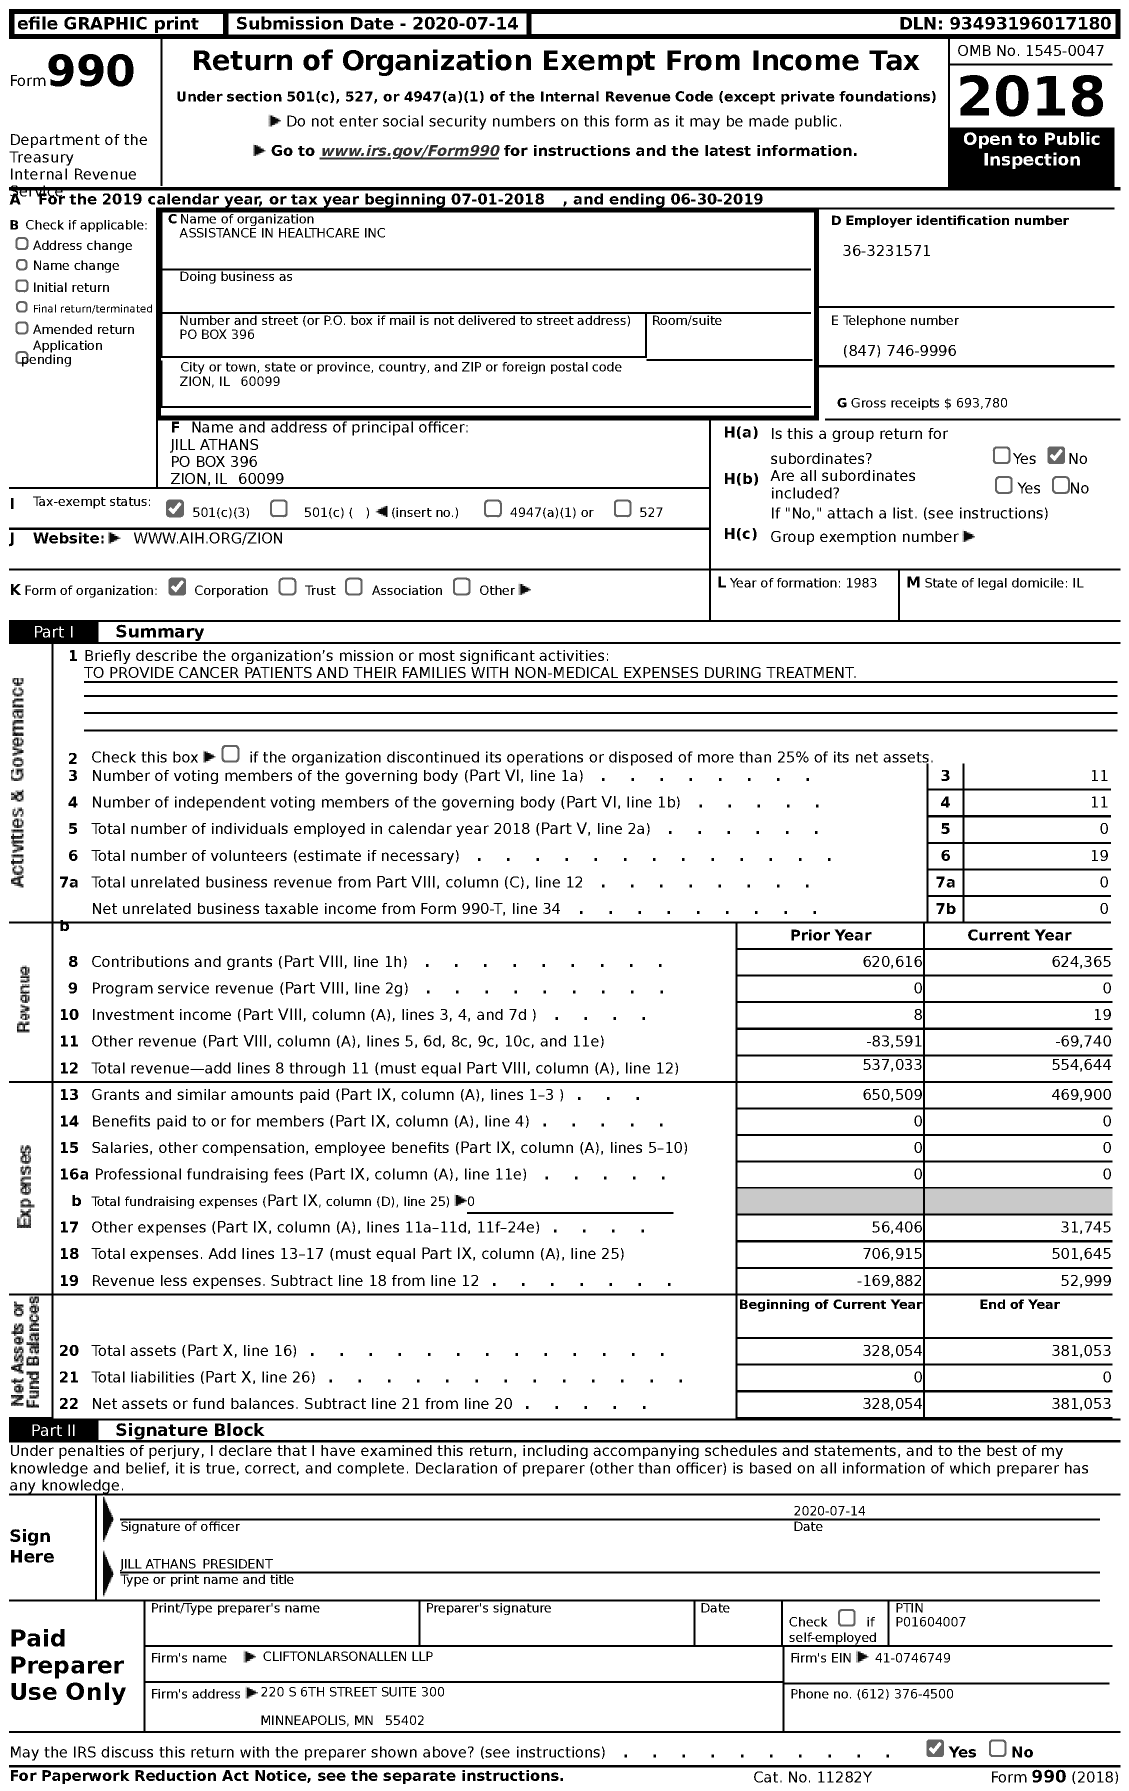 Image of first page of 2018 Form 990 for Assistance in Healthcare